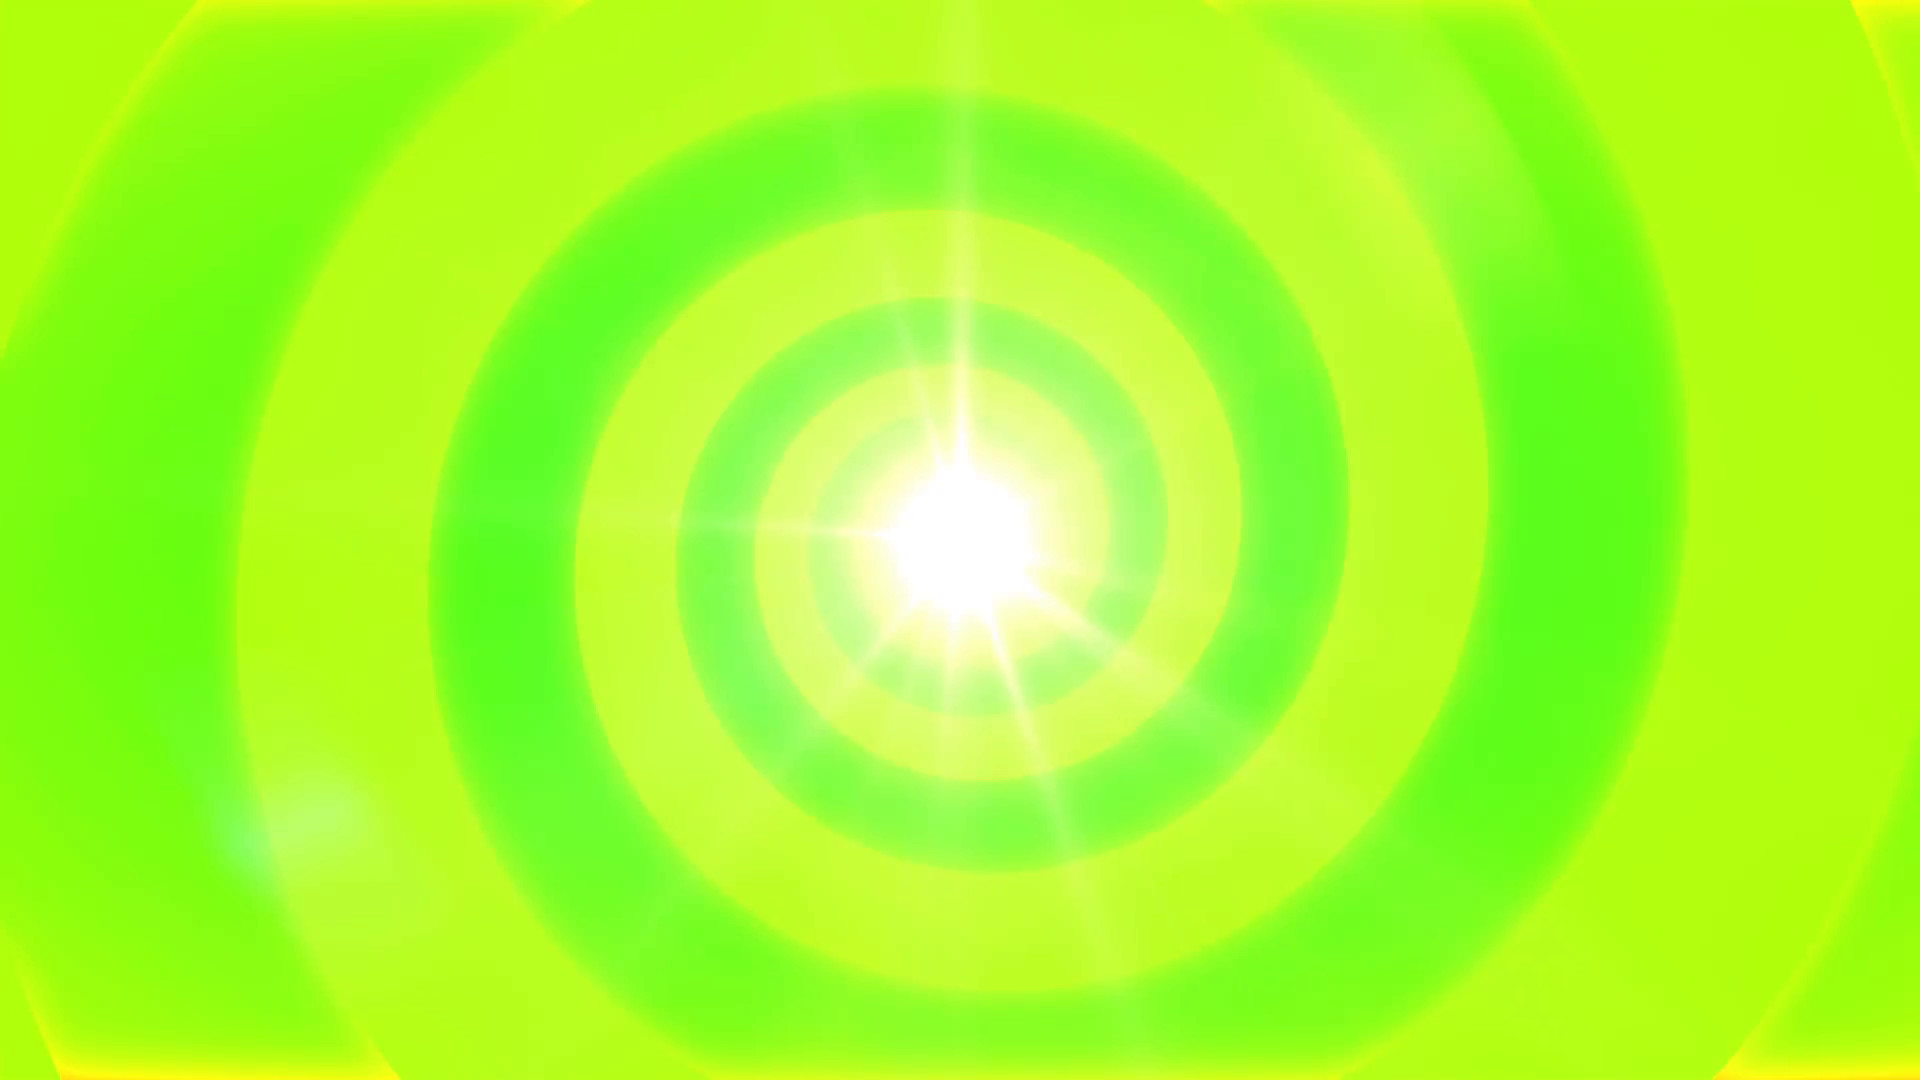 1920x1080 Hypnotic yellow and lime green spiral background with central light Motion  Background - VideoBlocks